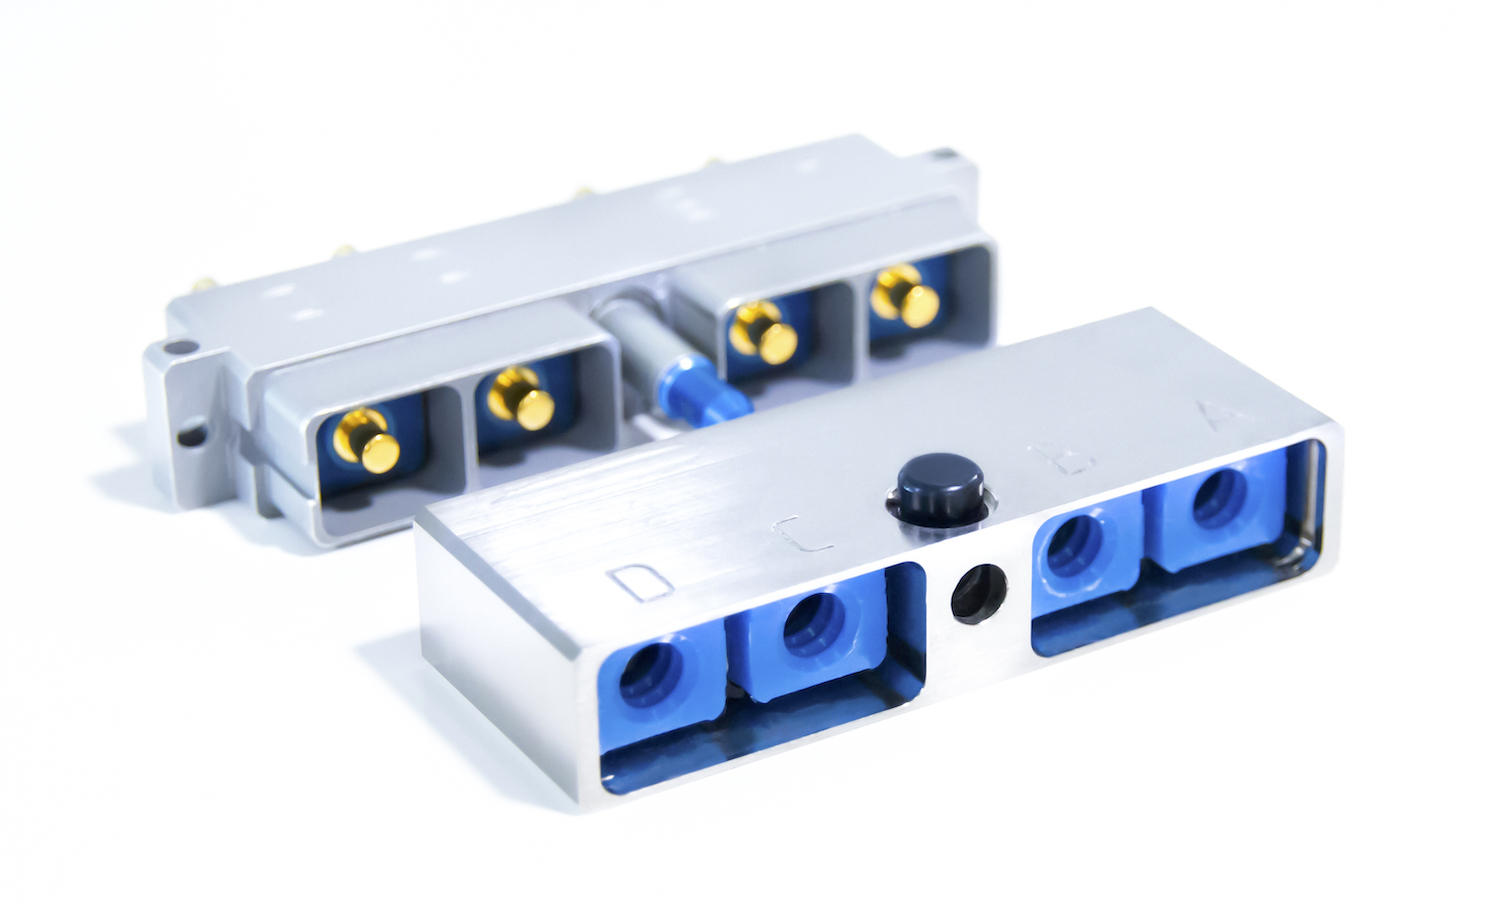 ARINC Rack and Panel Connectors from Nicomatic